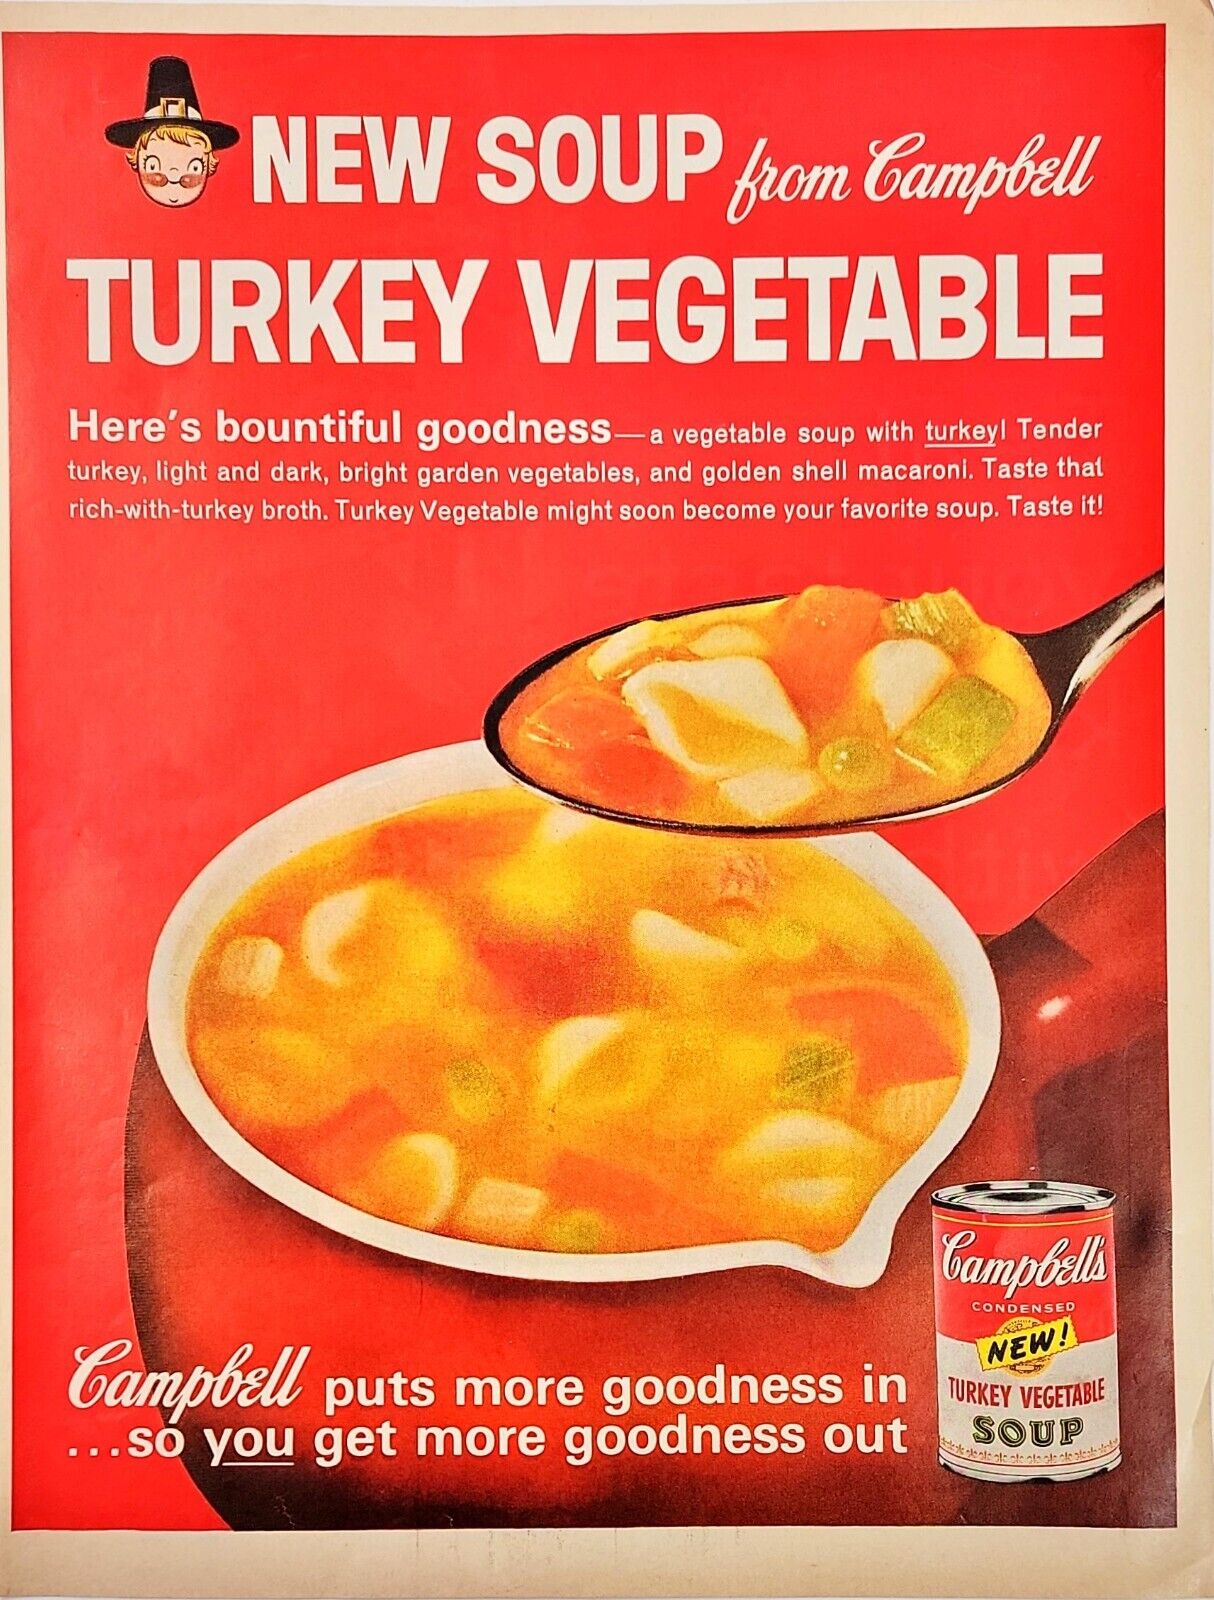 Vintage Jan 1963 Print Ad 10x13 New Soup From Campbell Turkey Vegetable Color